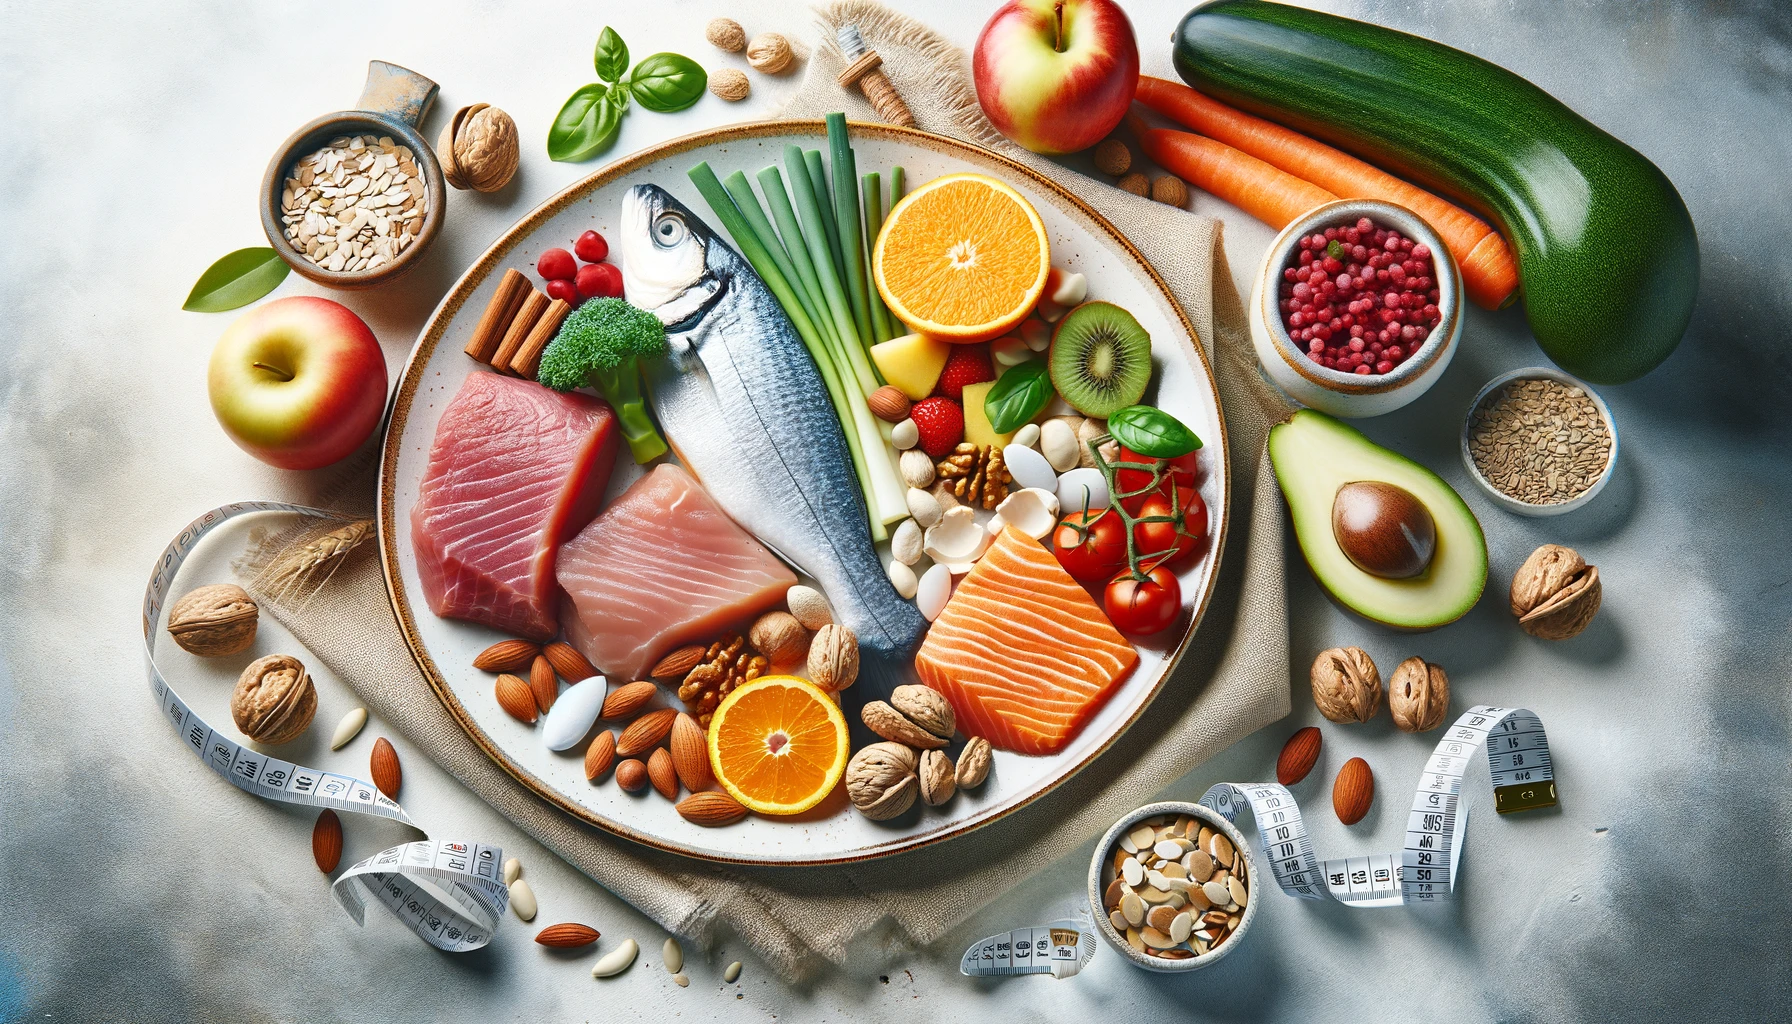 A balanced plate of Paleo diet foods including lean meats, vegetables, and fruits, showcasing a healthy eating plan for weight loss